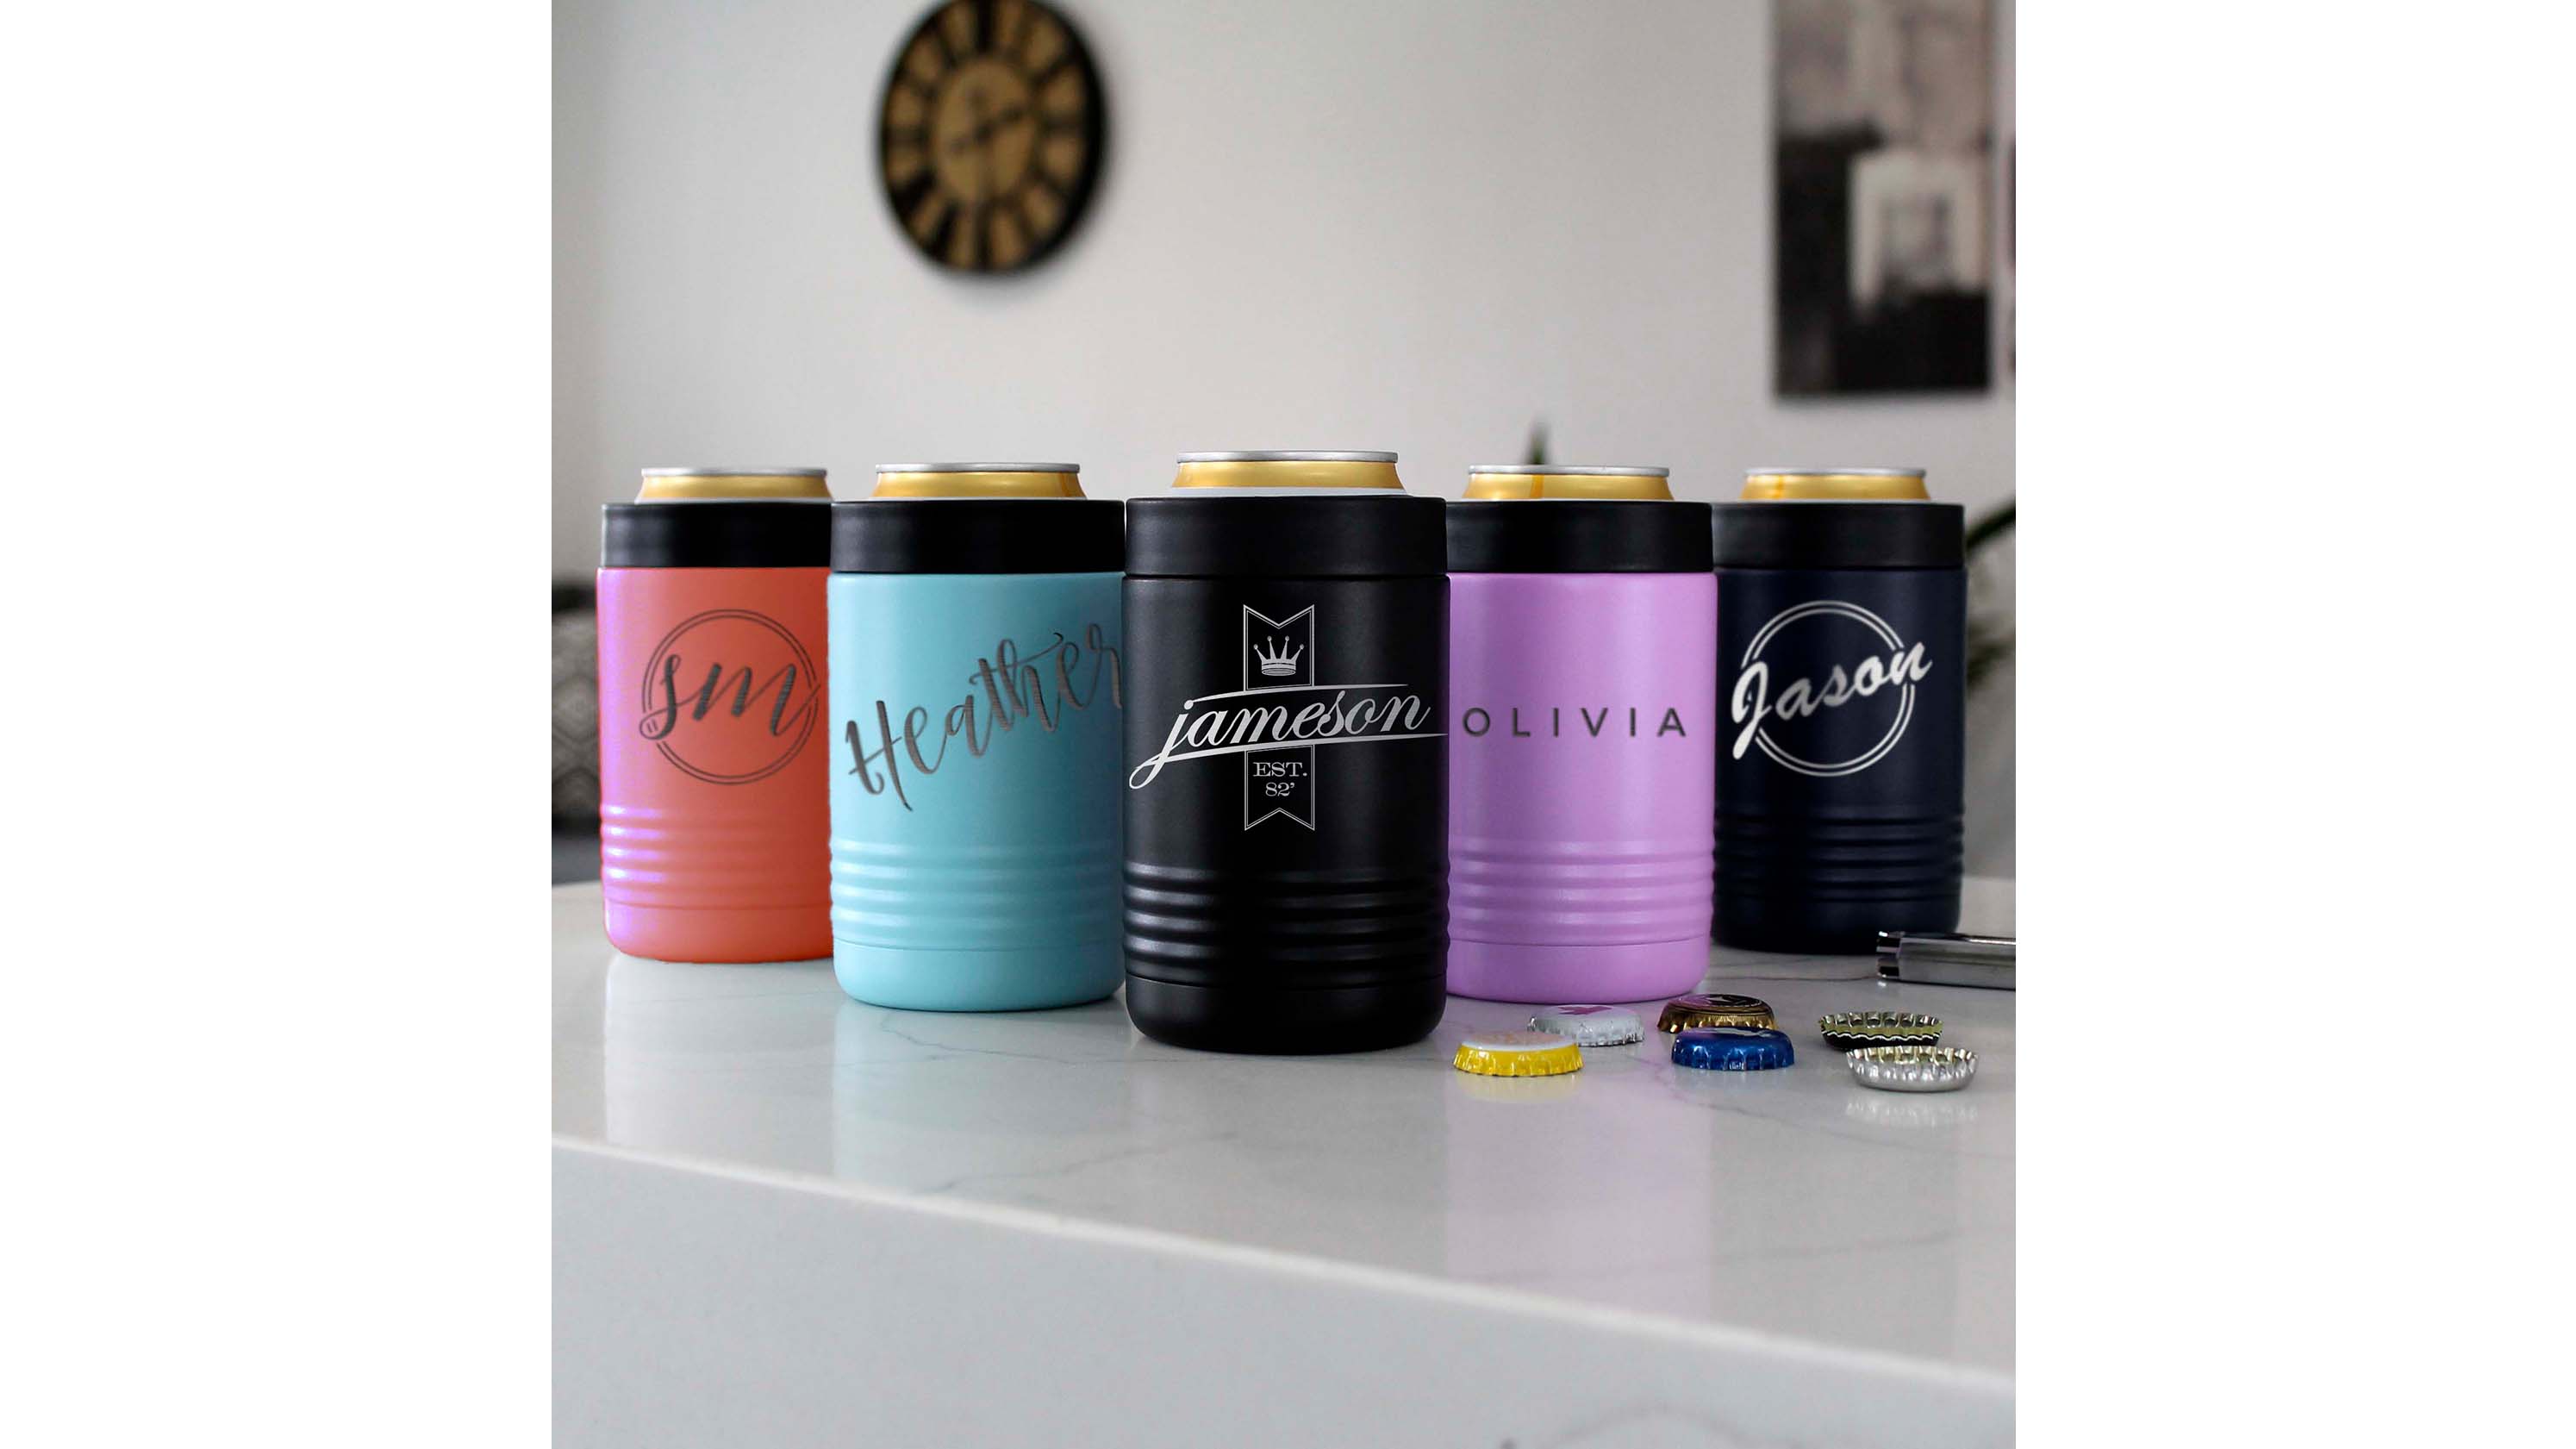 Best Dad Ever  Personalized Metal Can Cooler - Etchey